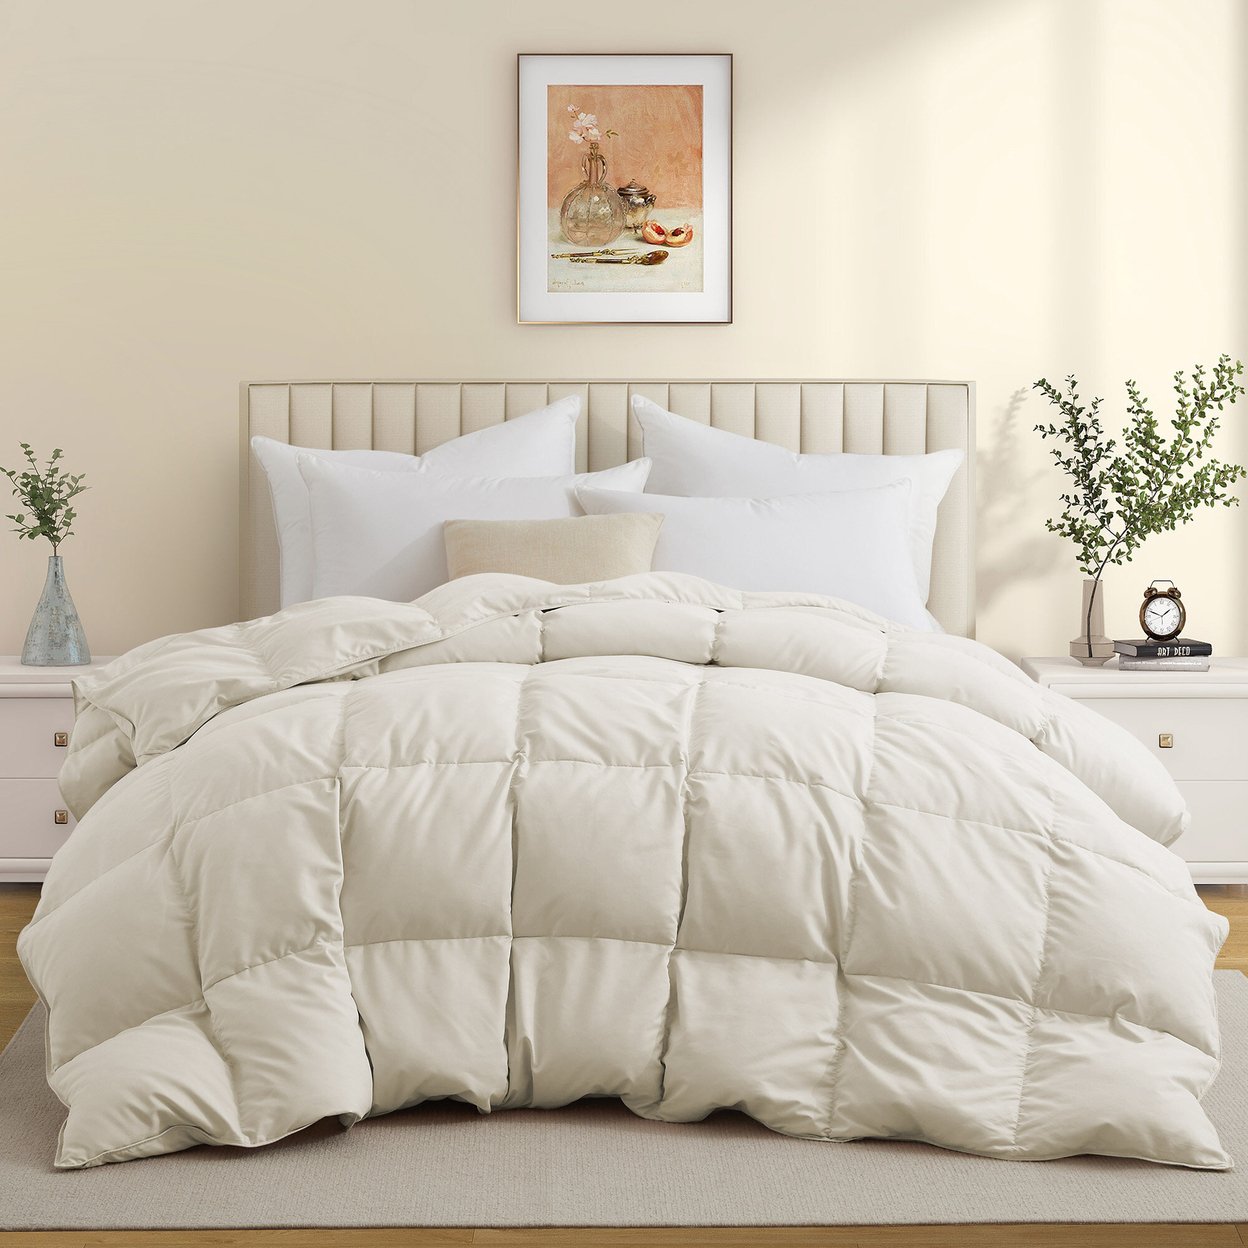 Premium All Seasons White Goose Feather Fiber And Down Comforter - Butter Cream, Twin